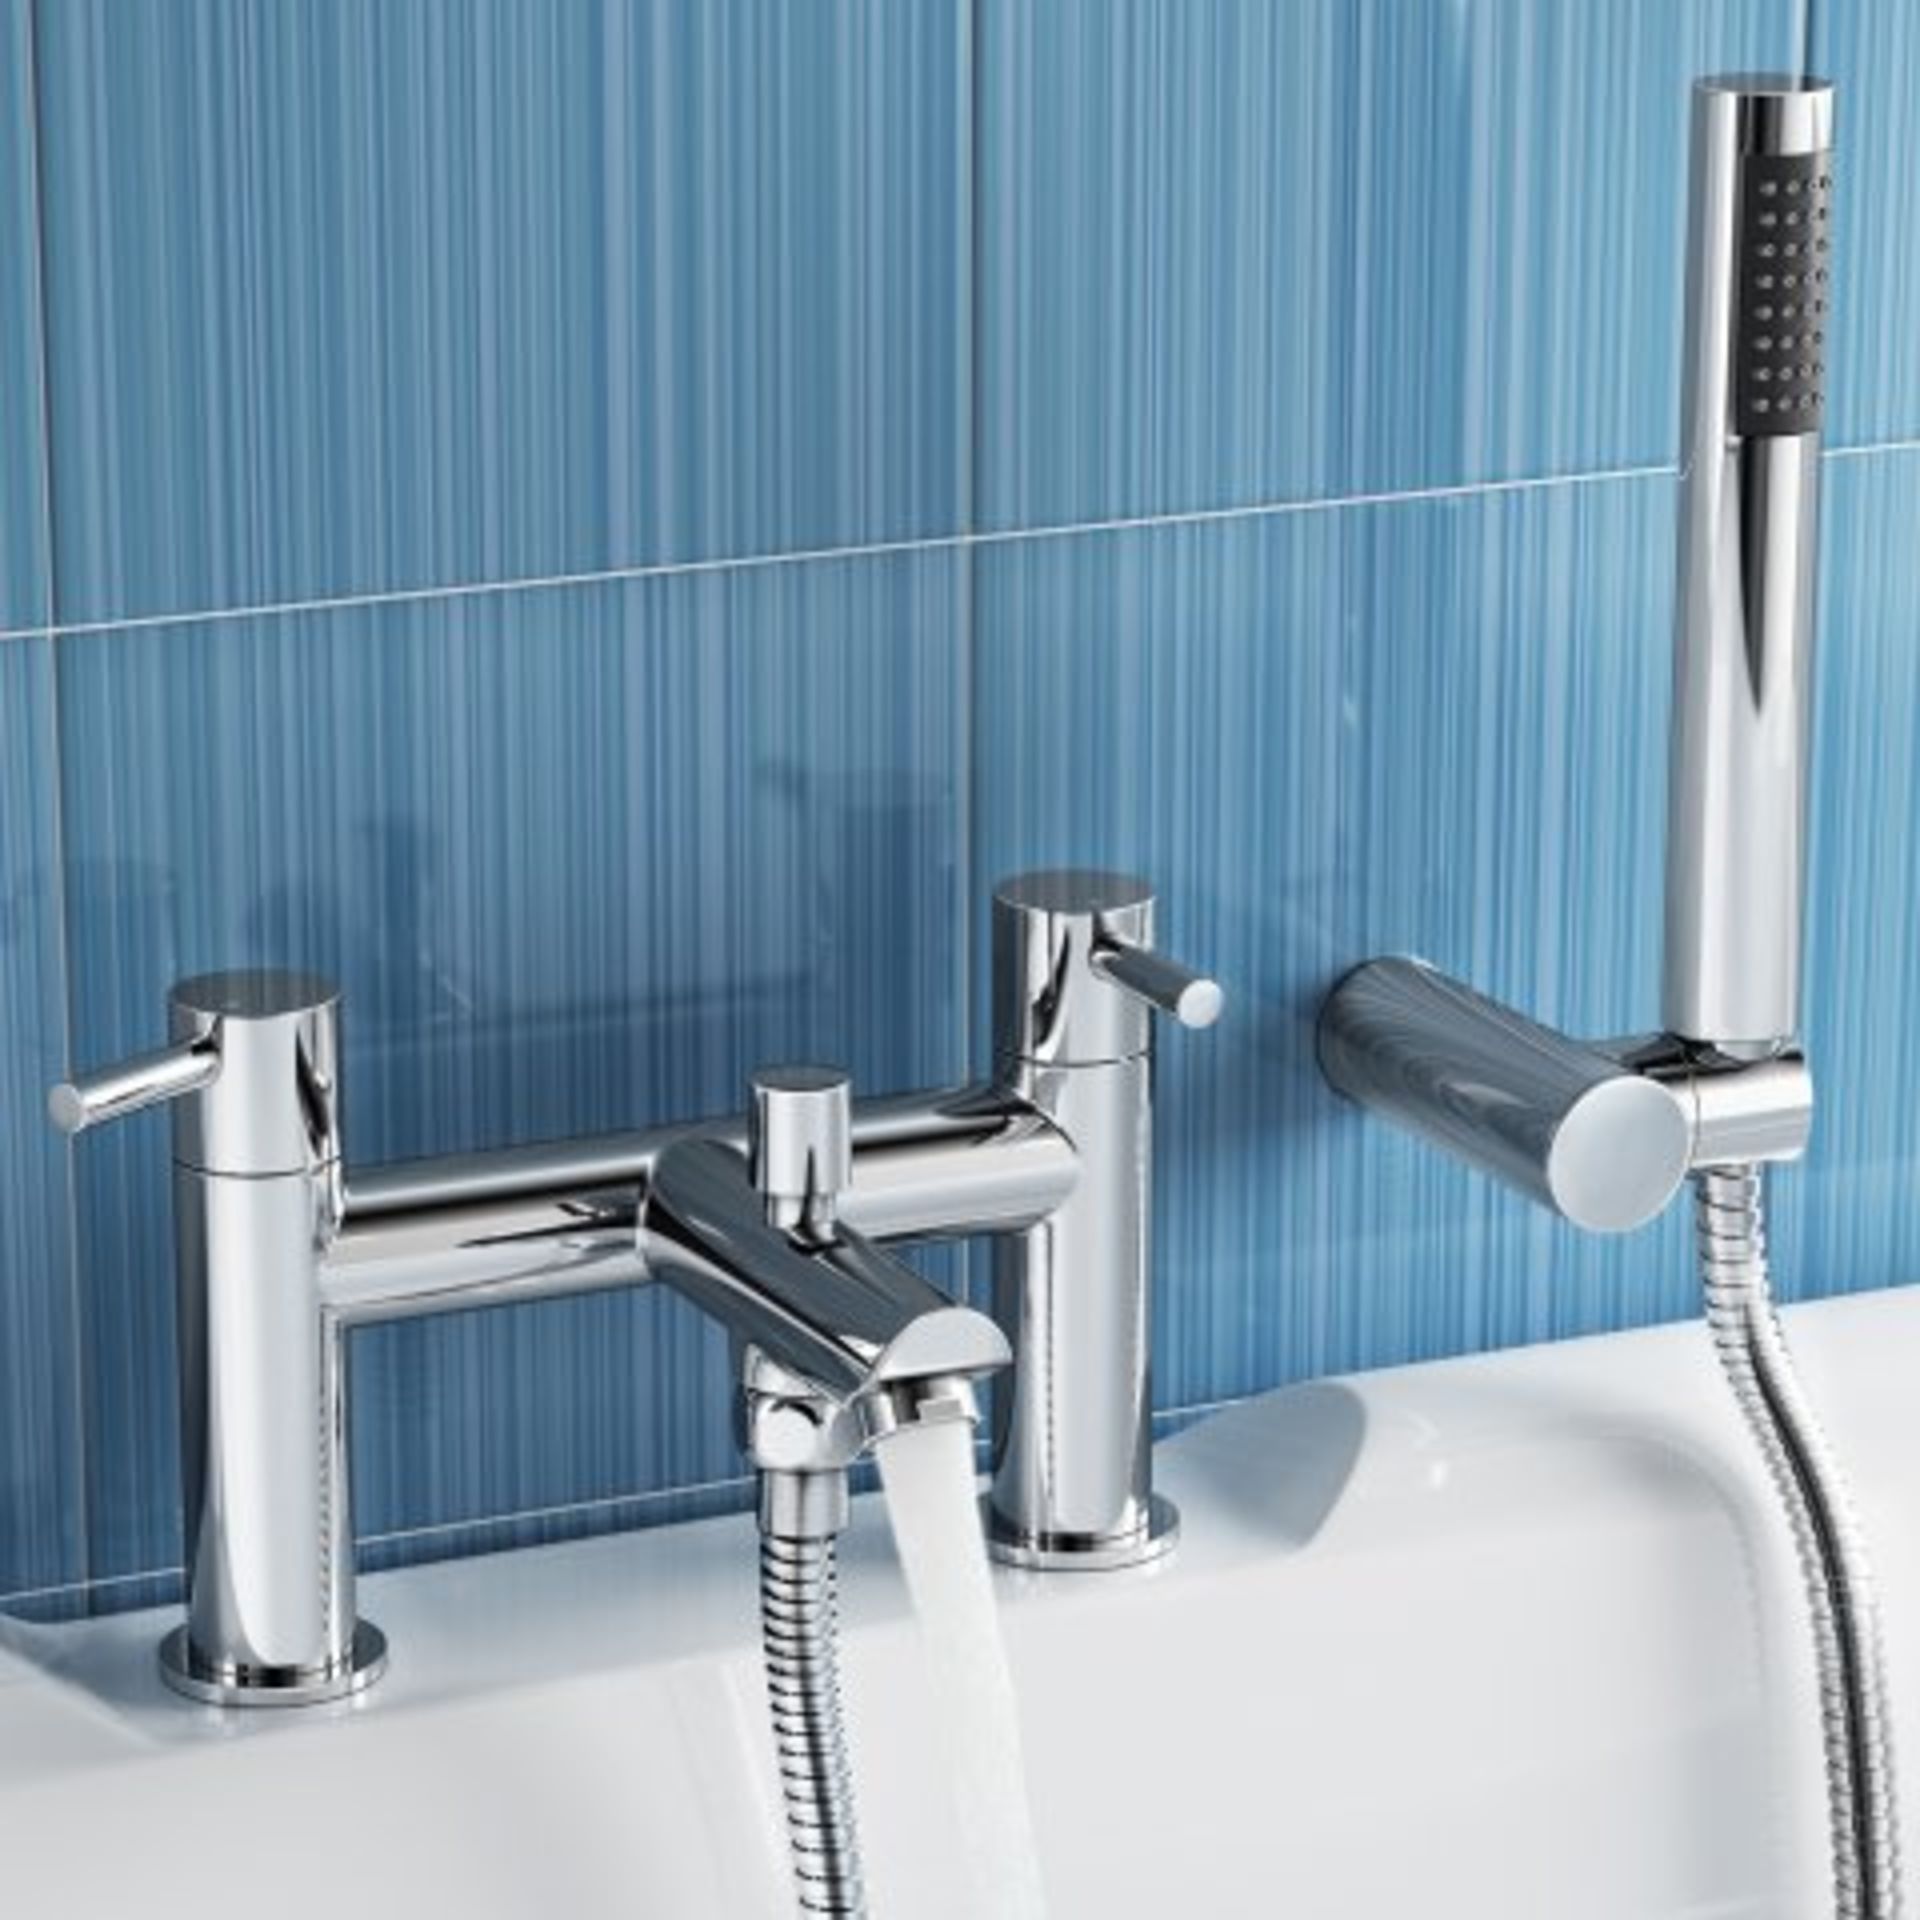 (V94) Gladstone II Bath Mixer Shower Tap with Hand Held Presenting a contemporary design, this solid